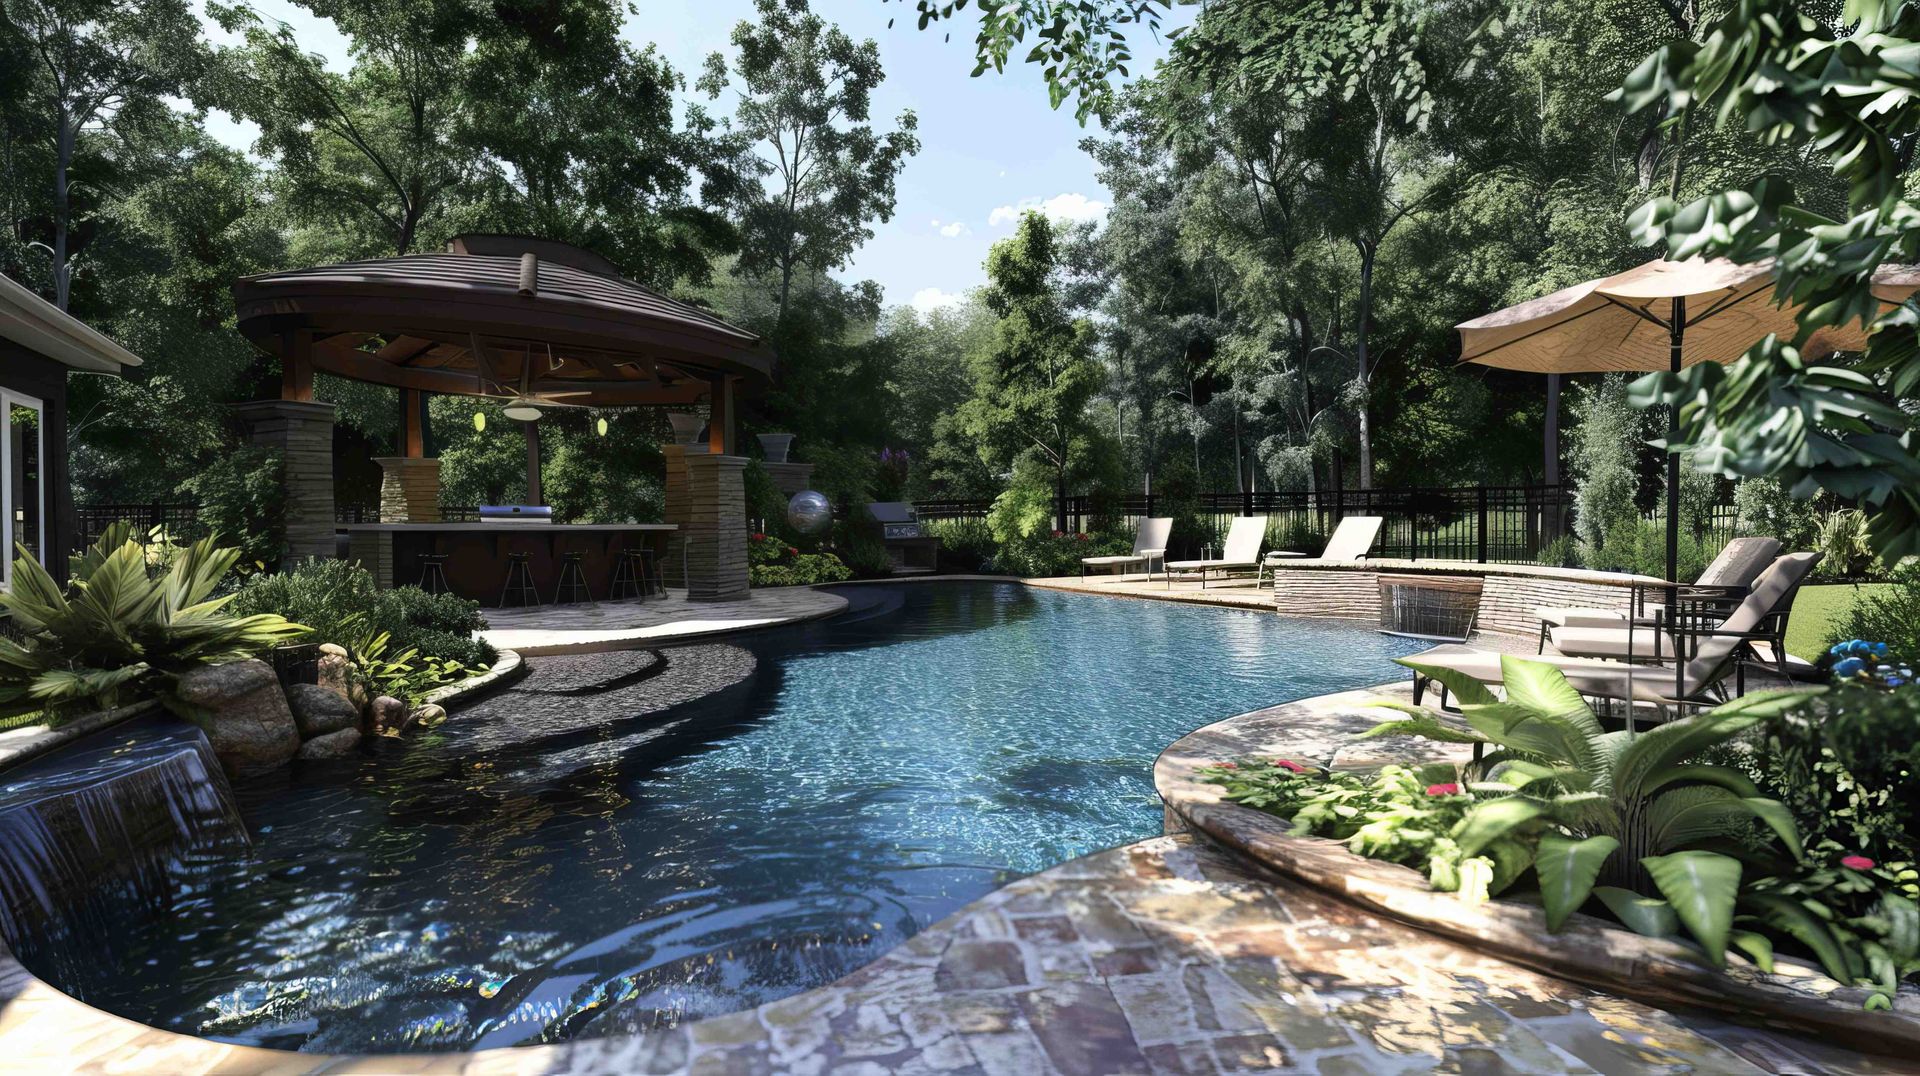 A gorgeous pool in a yard